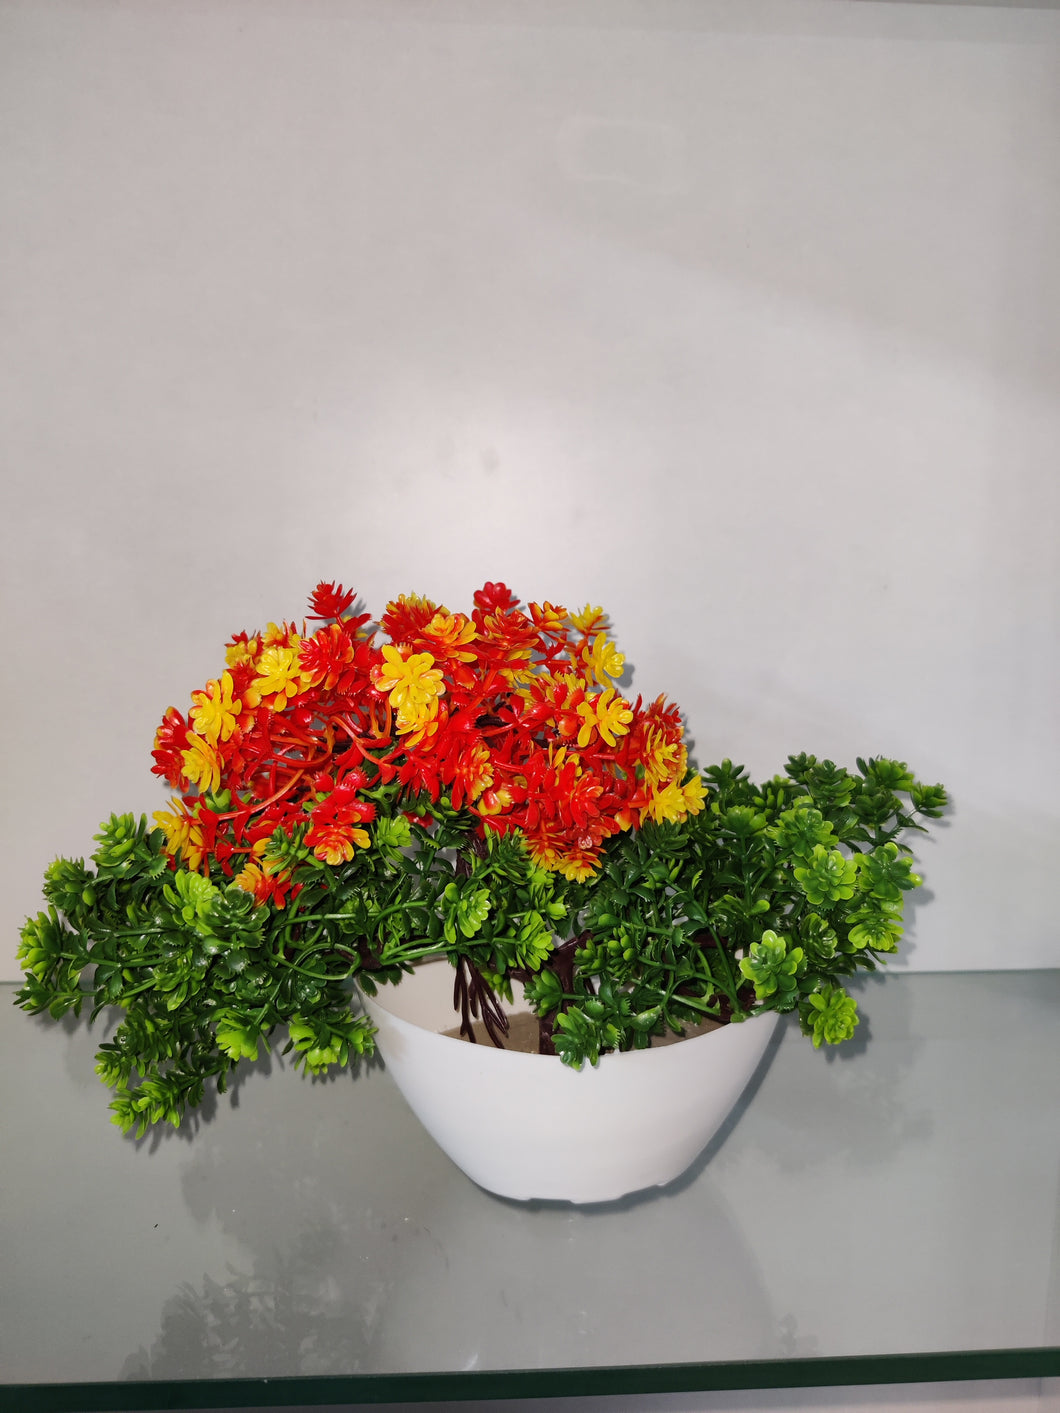 Artificial Colorful Greenery Plant